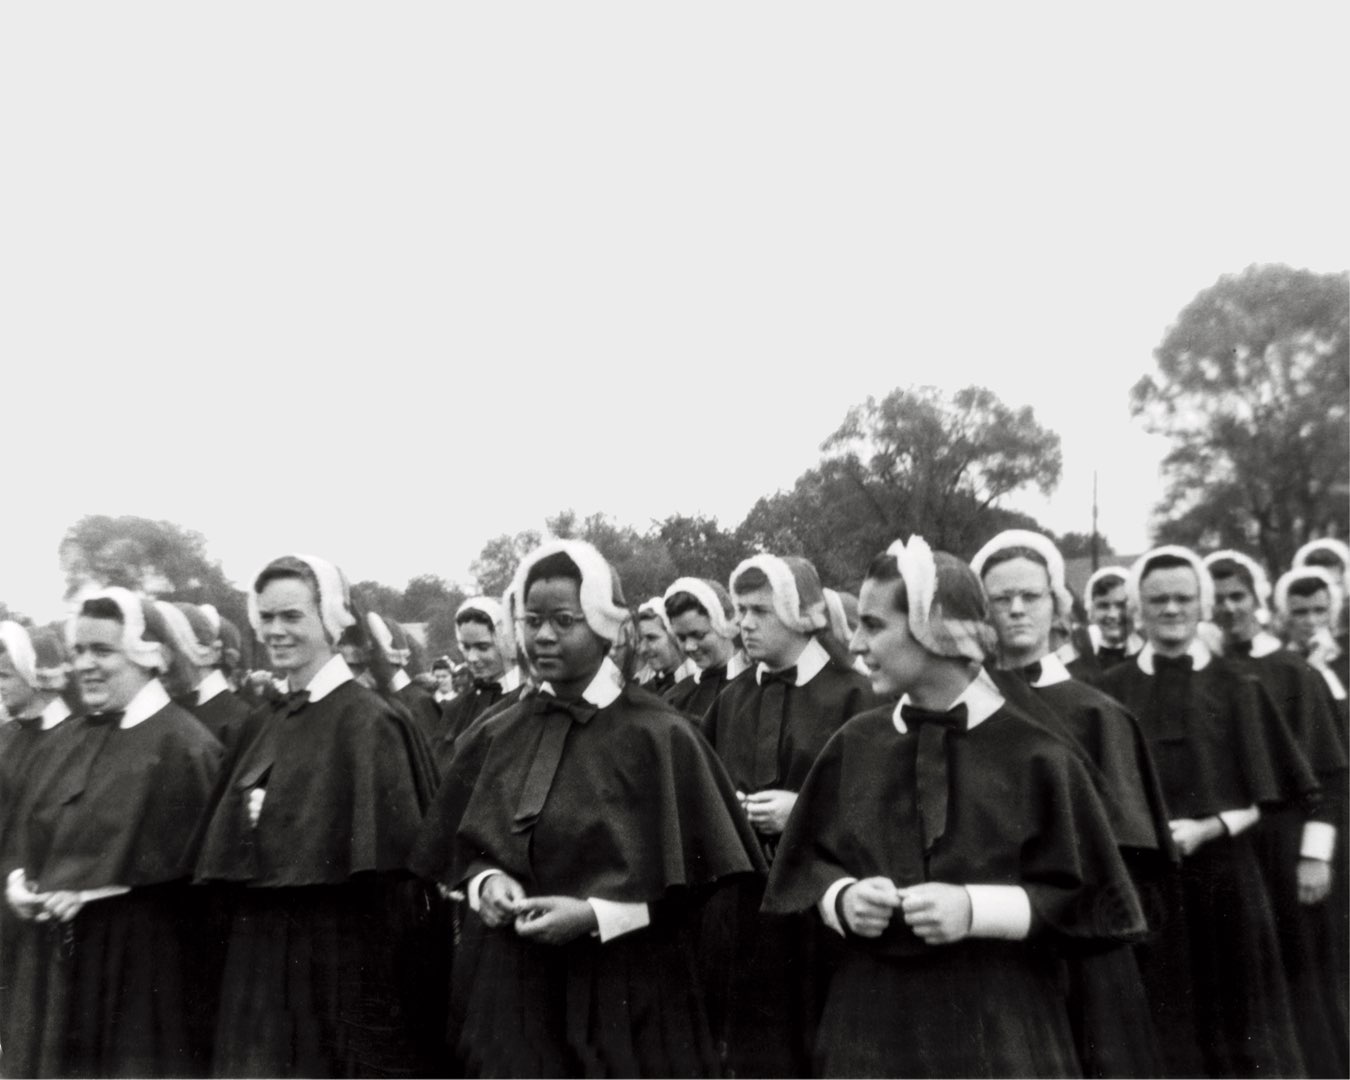 A black-and-white photo of a young Sister Cora Billings in habit amid a large crowd of novitiate nuns